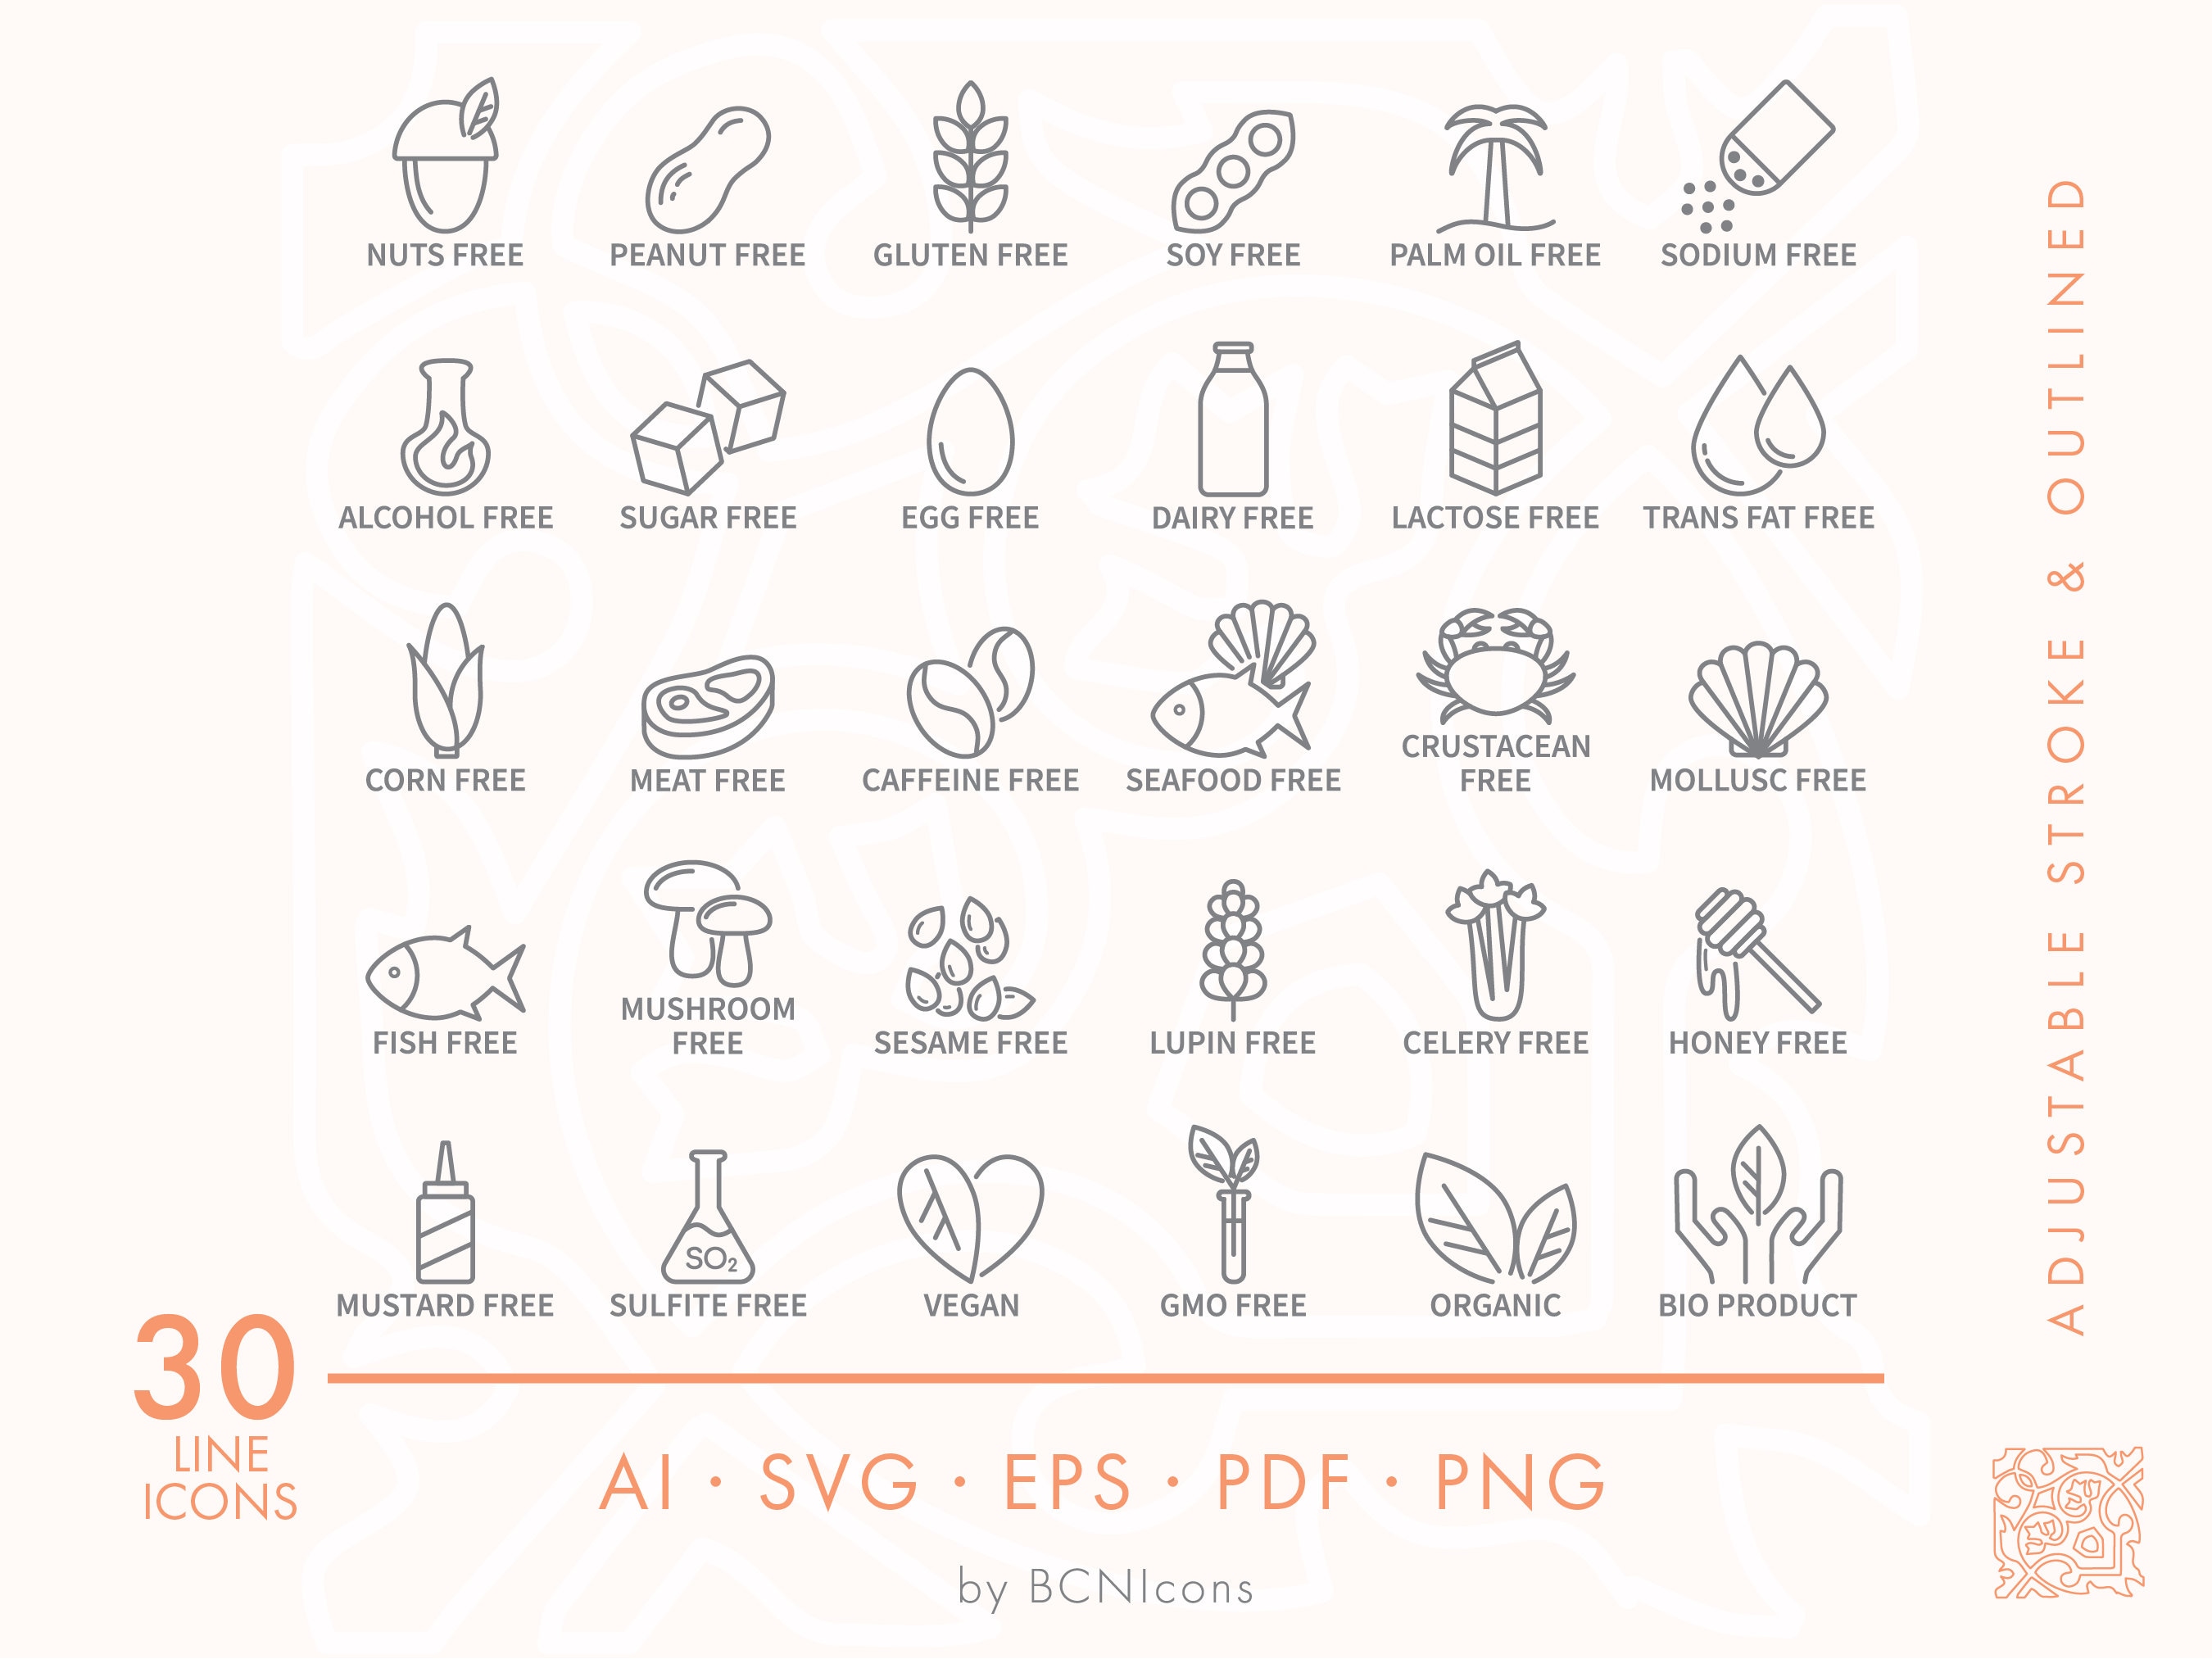 Category Icons - Free SVG & PNG Category Images - Noun Project